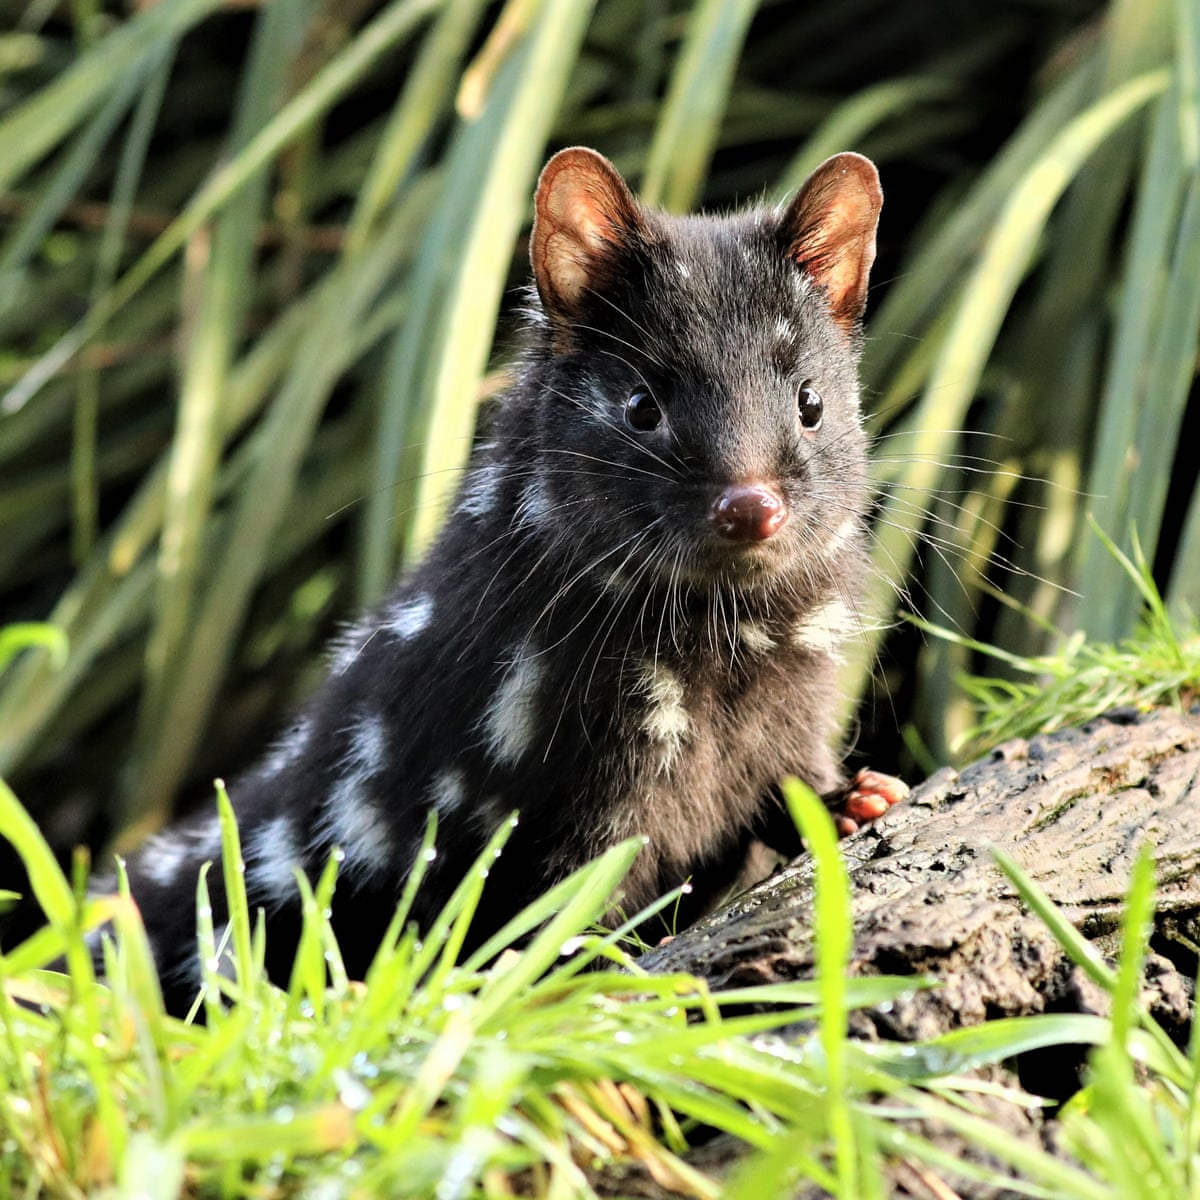 Release of 10 quolls boosts 'insurance' population of endangered marsupial  | Endangered species | The Guardian